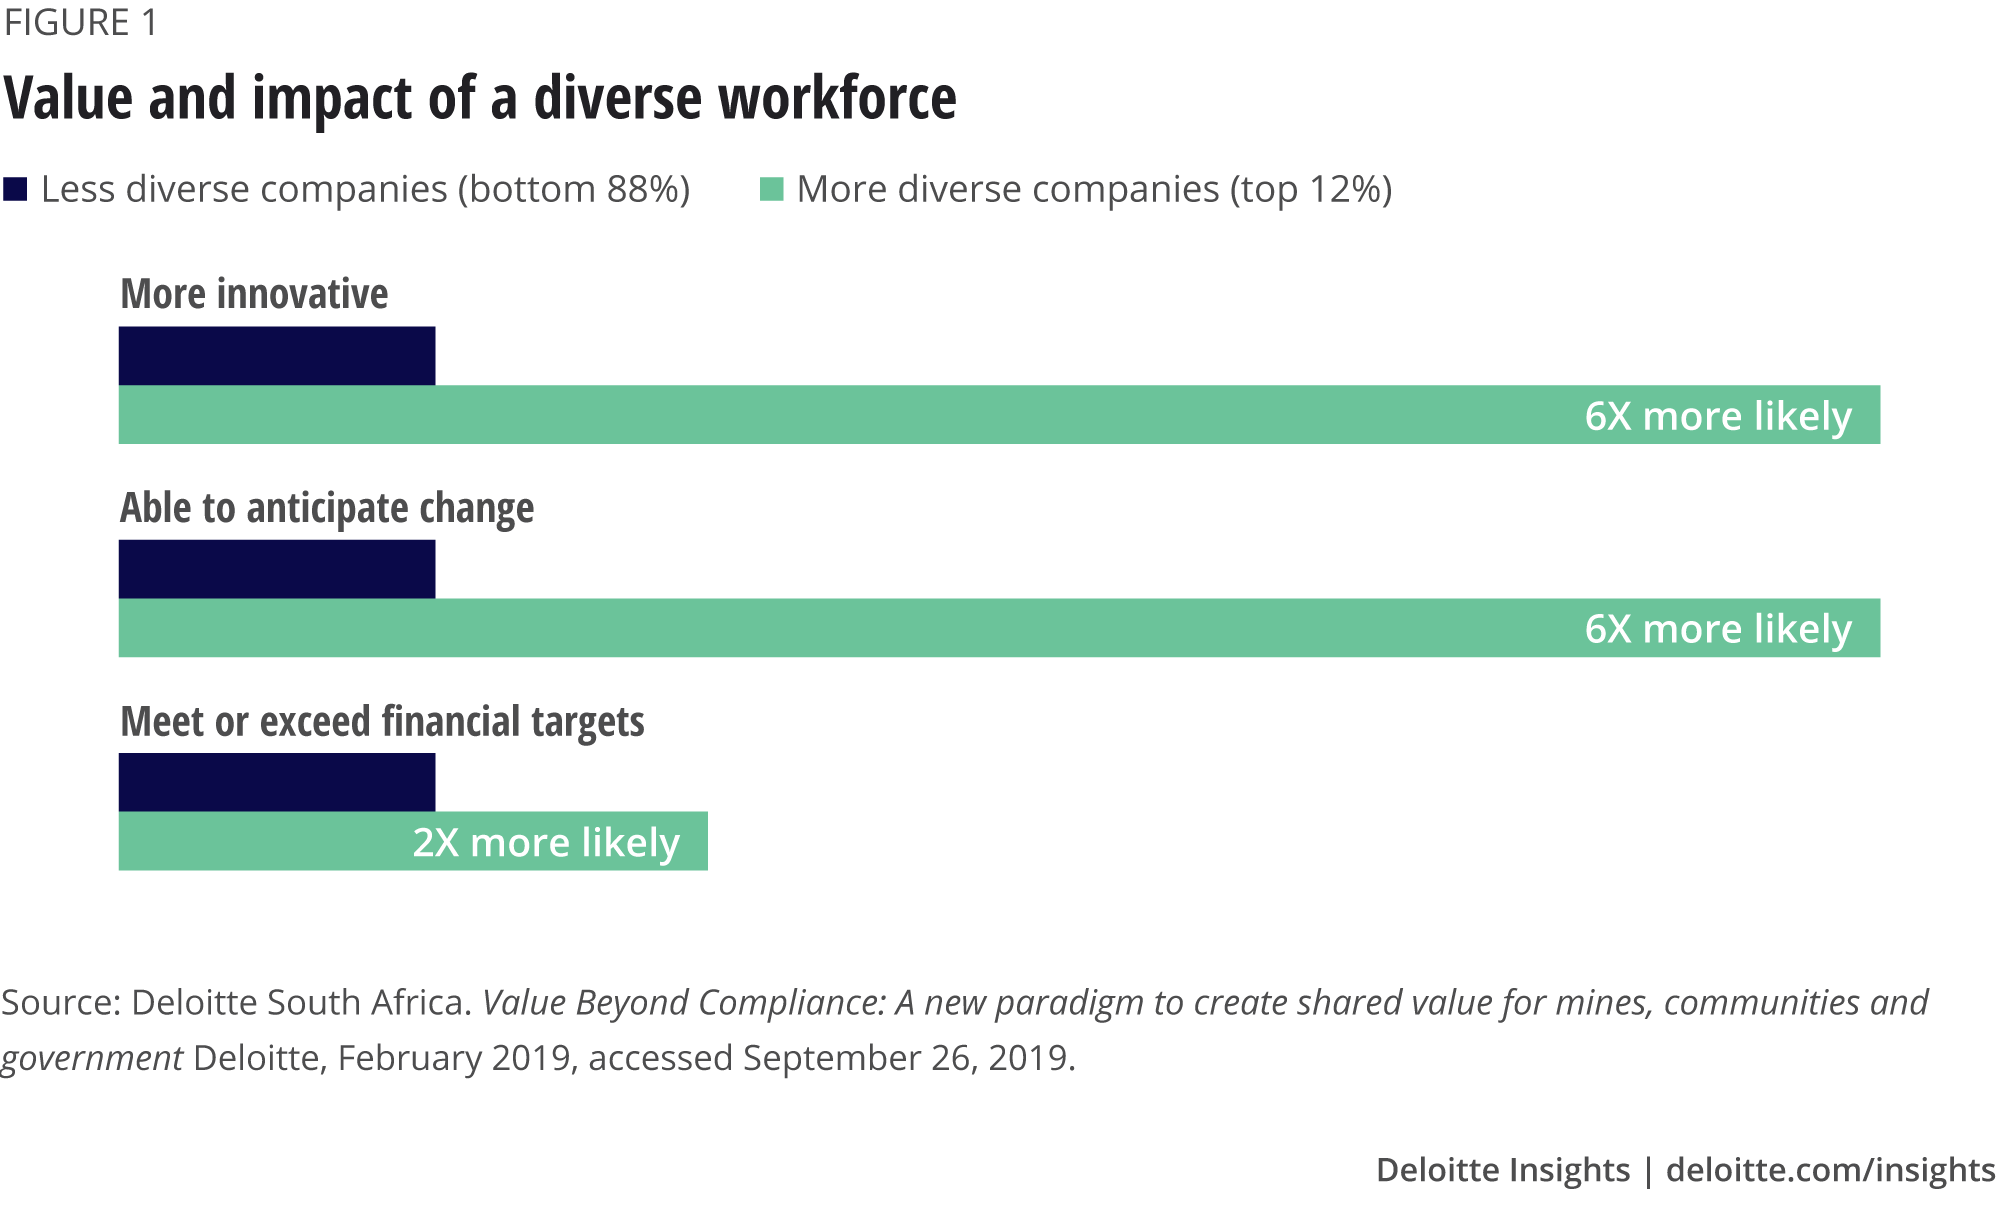 Value and impact of a diverse workforce